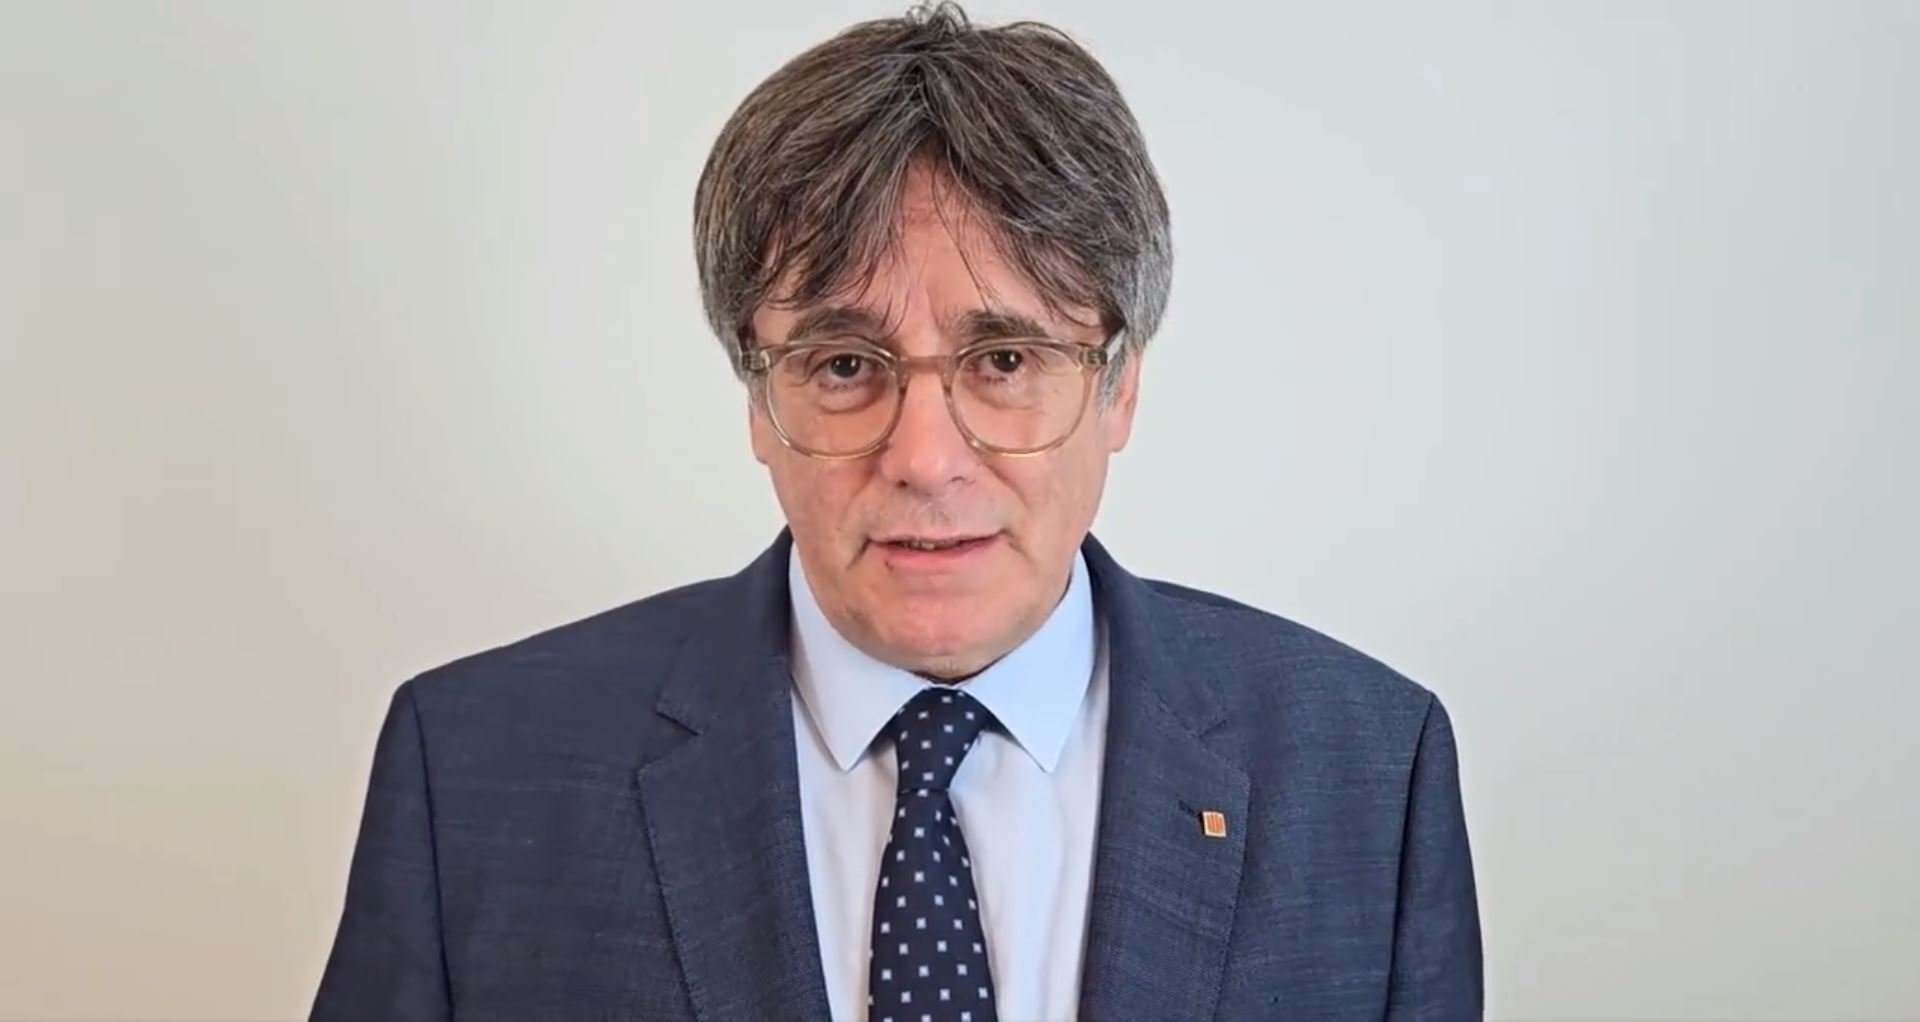 Puigdemont demands "diligence" from Sánchez on EU status of Catalan: "We've waited long enough"